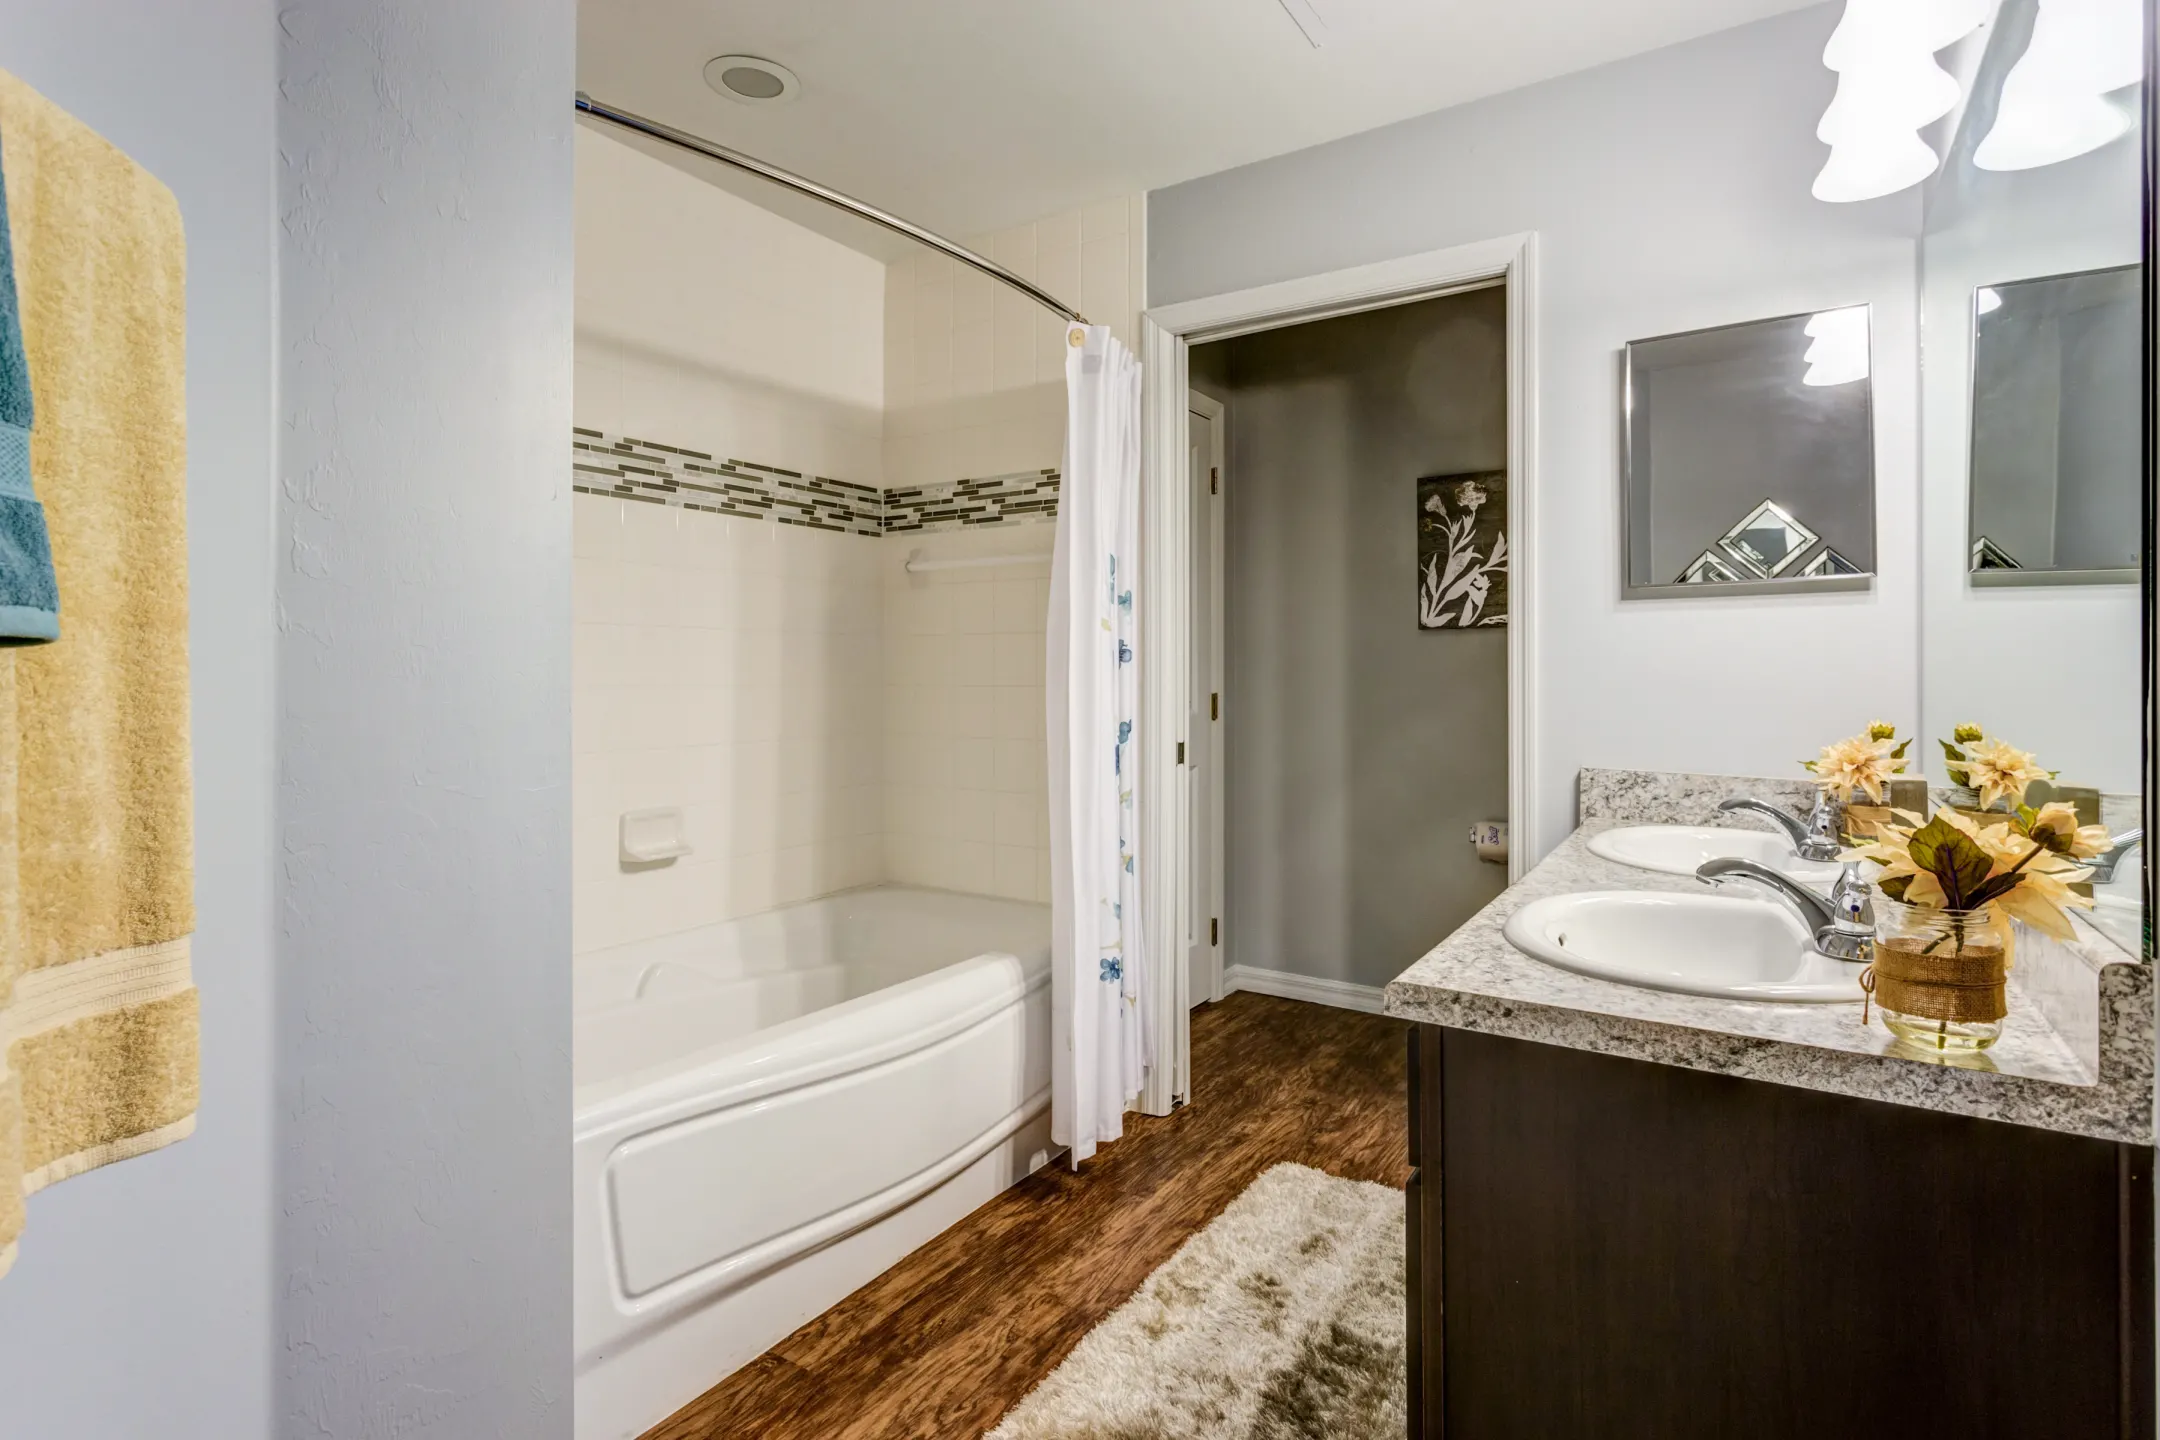 Bathroom - Channelside Contemporary Living Apartments - Fort Myers, FL